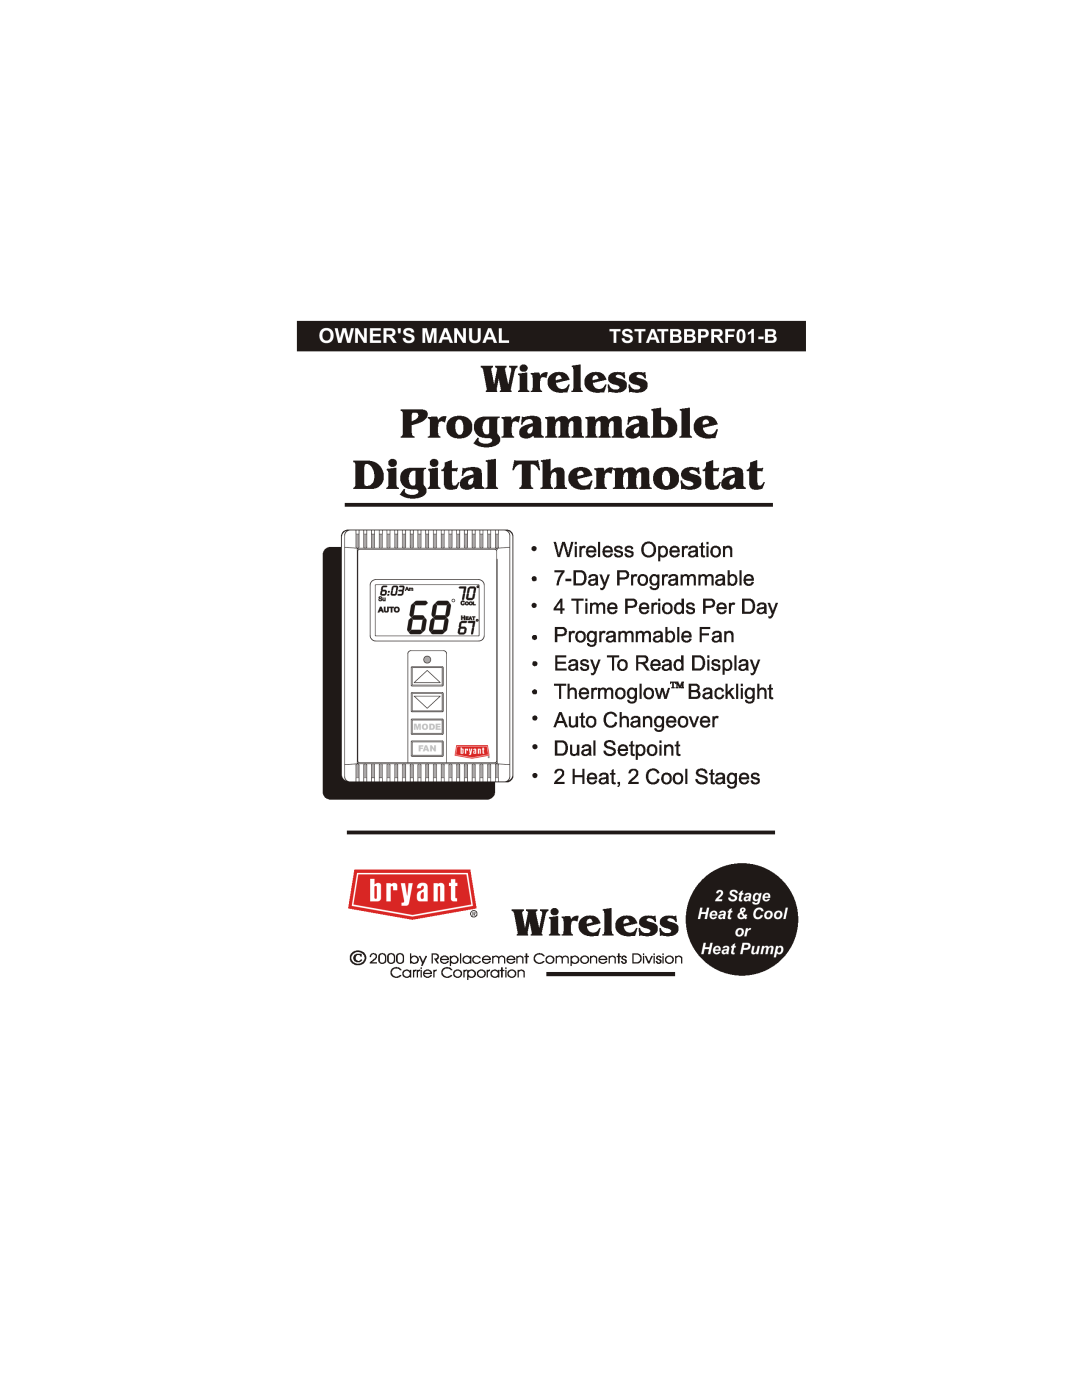 Bryant TSTATBBPRF01-B owner manual Wireless Operation 7-Day Programmable 4 Time Periods Per Day, Wireless or, Heat Pump 